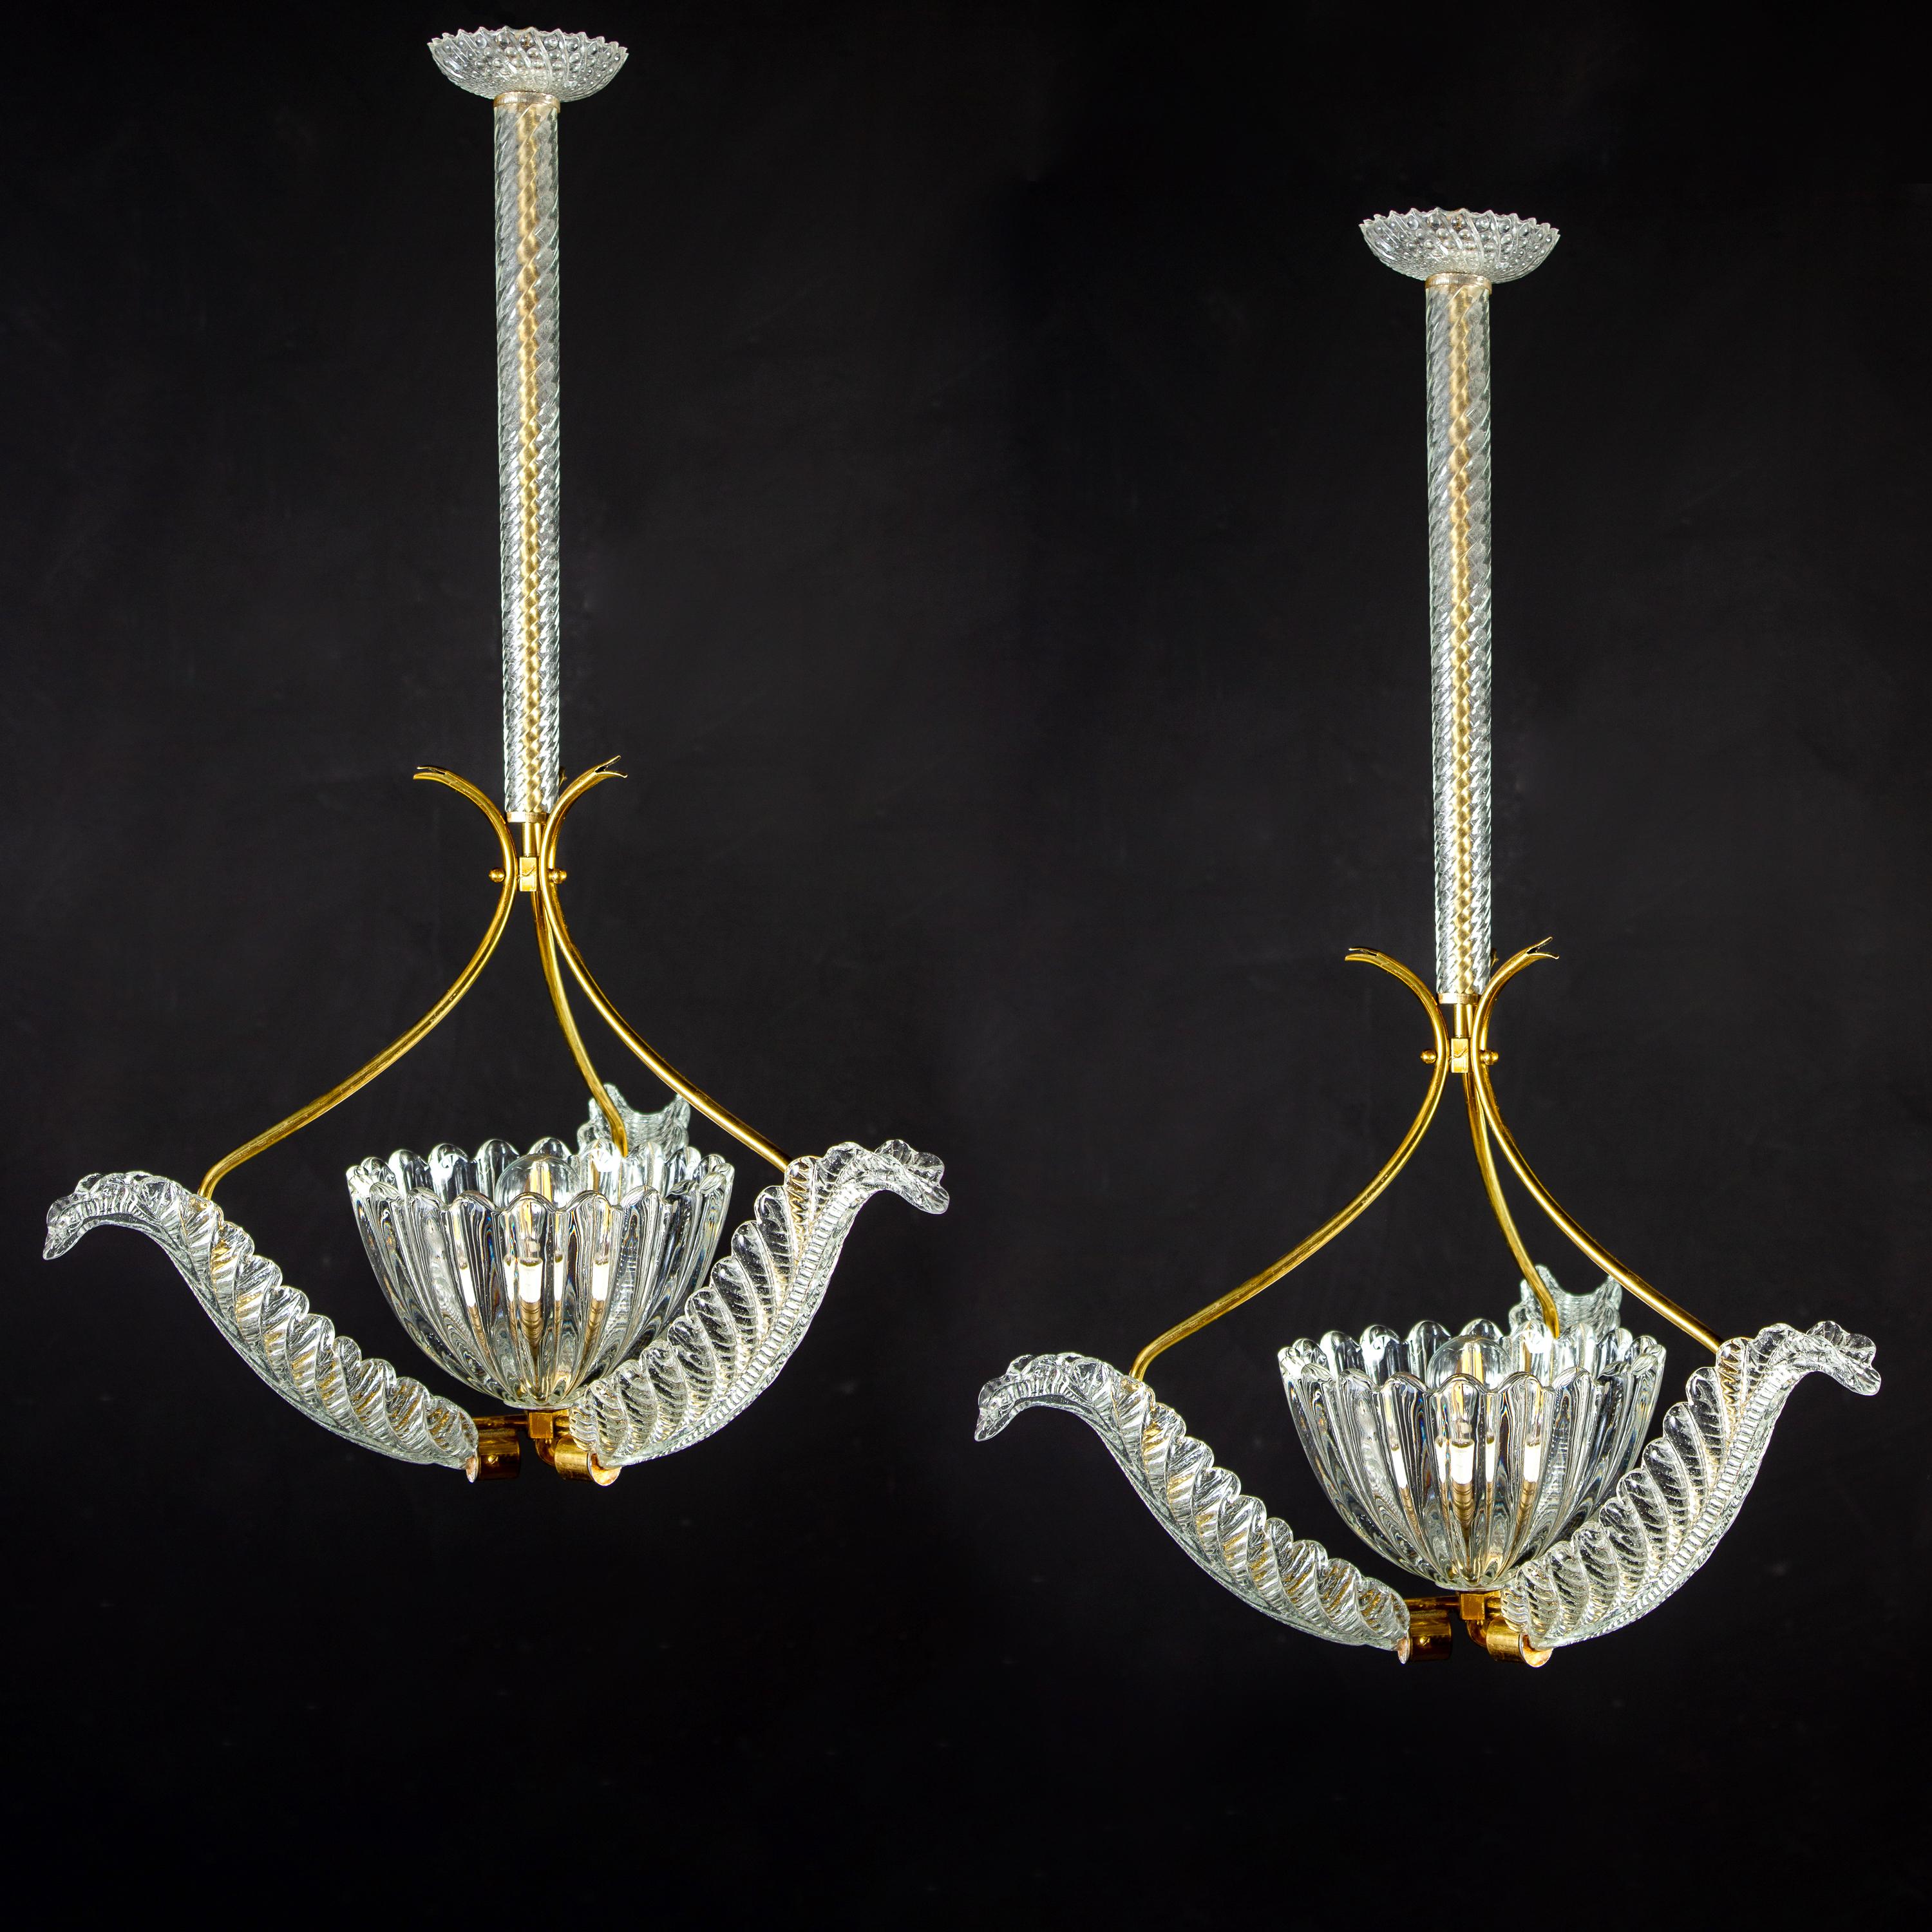 Pair of Liberty Pendants or Lanterns by Ercole Barovier, 1940s For Sale 1